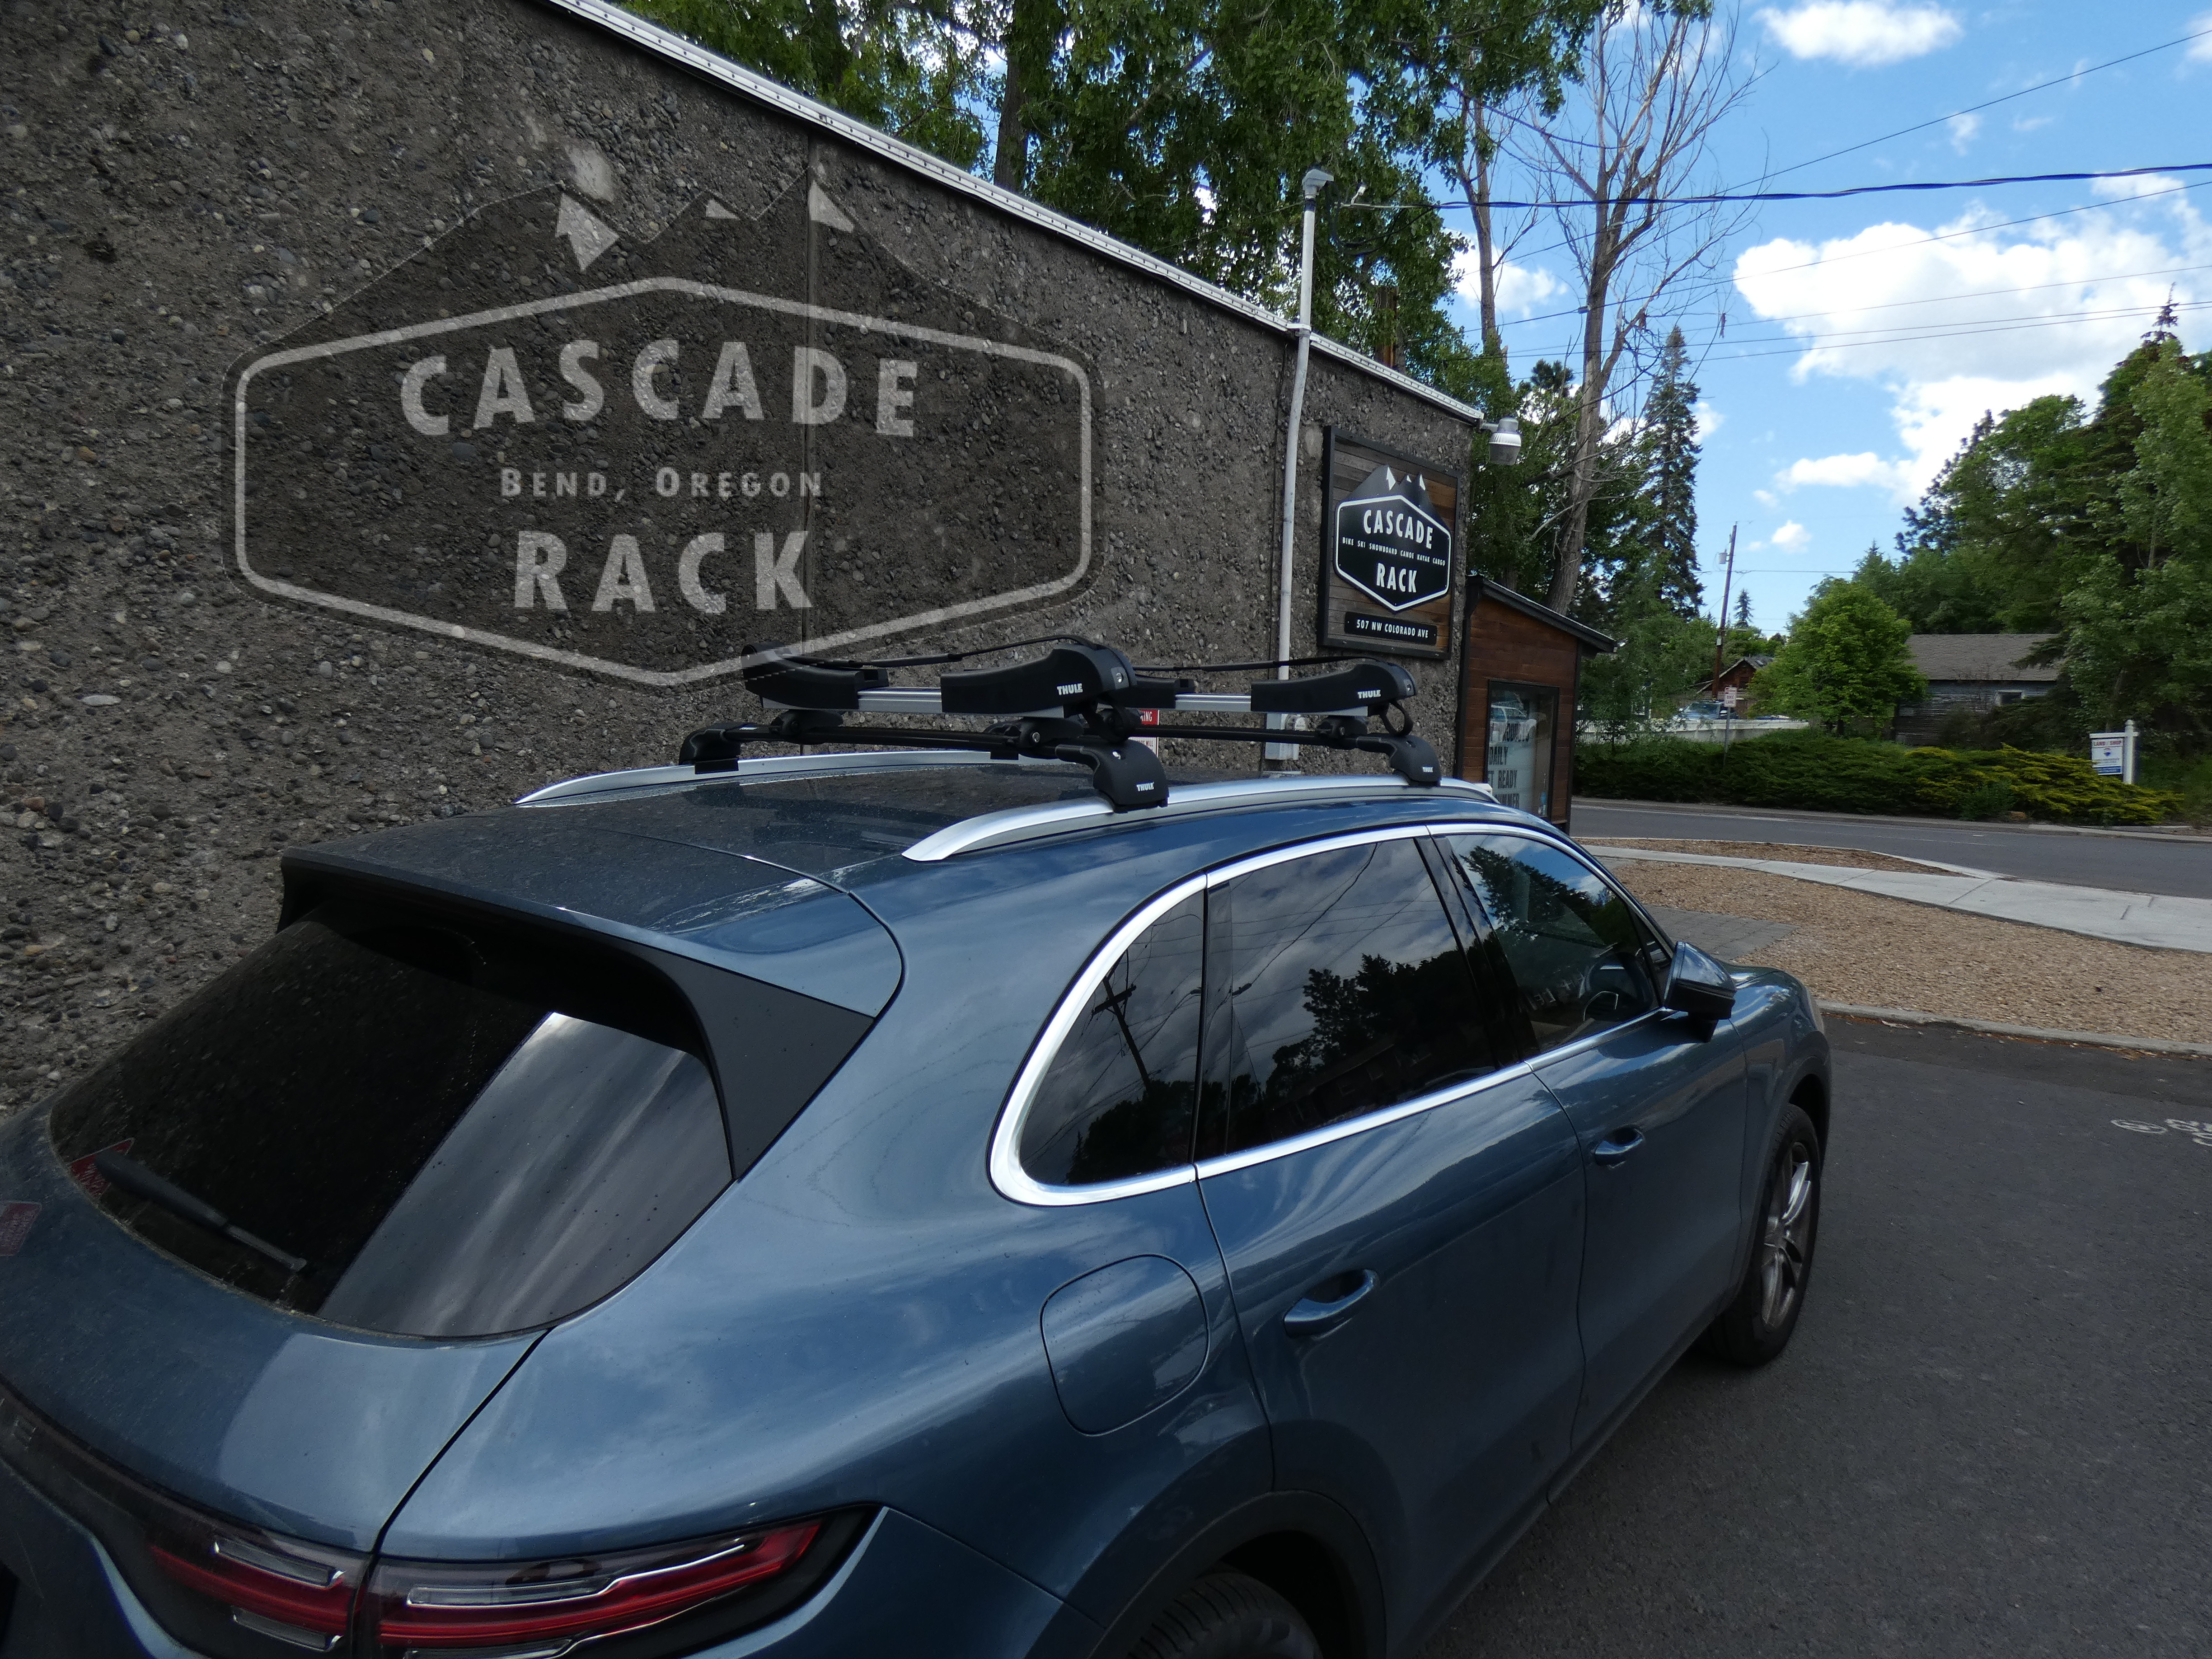 2019 Porsche Cayenne - Roof Rack with Paddle Board Rack - Thule